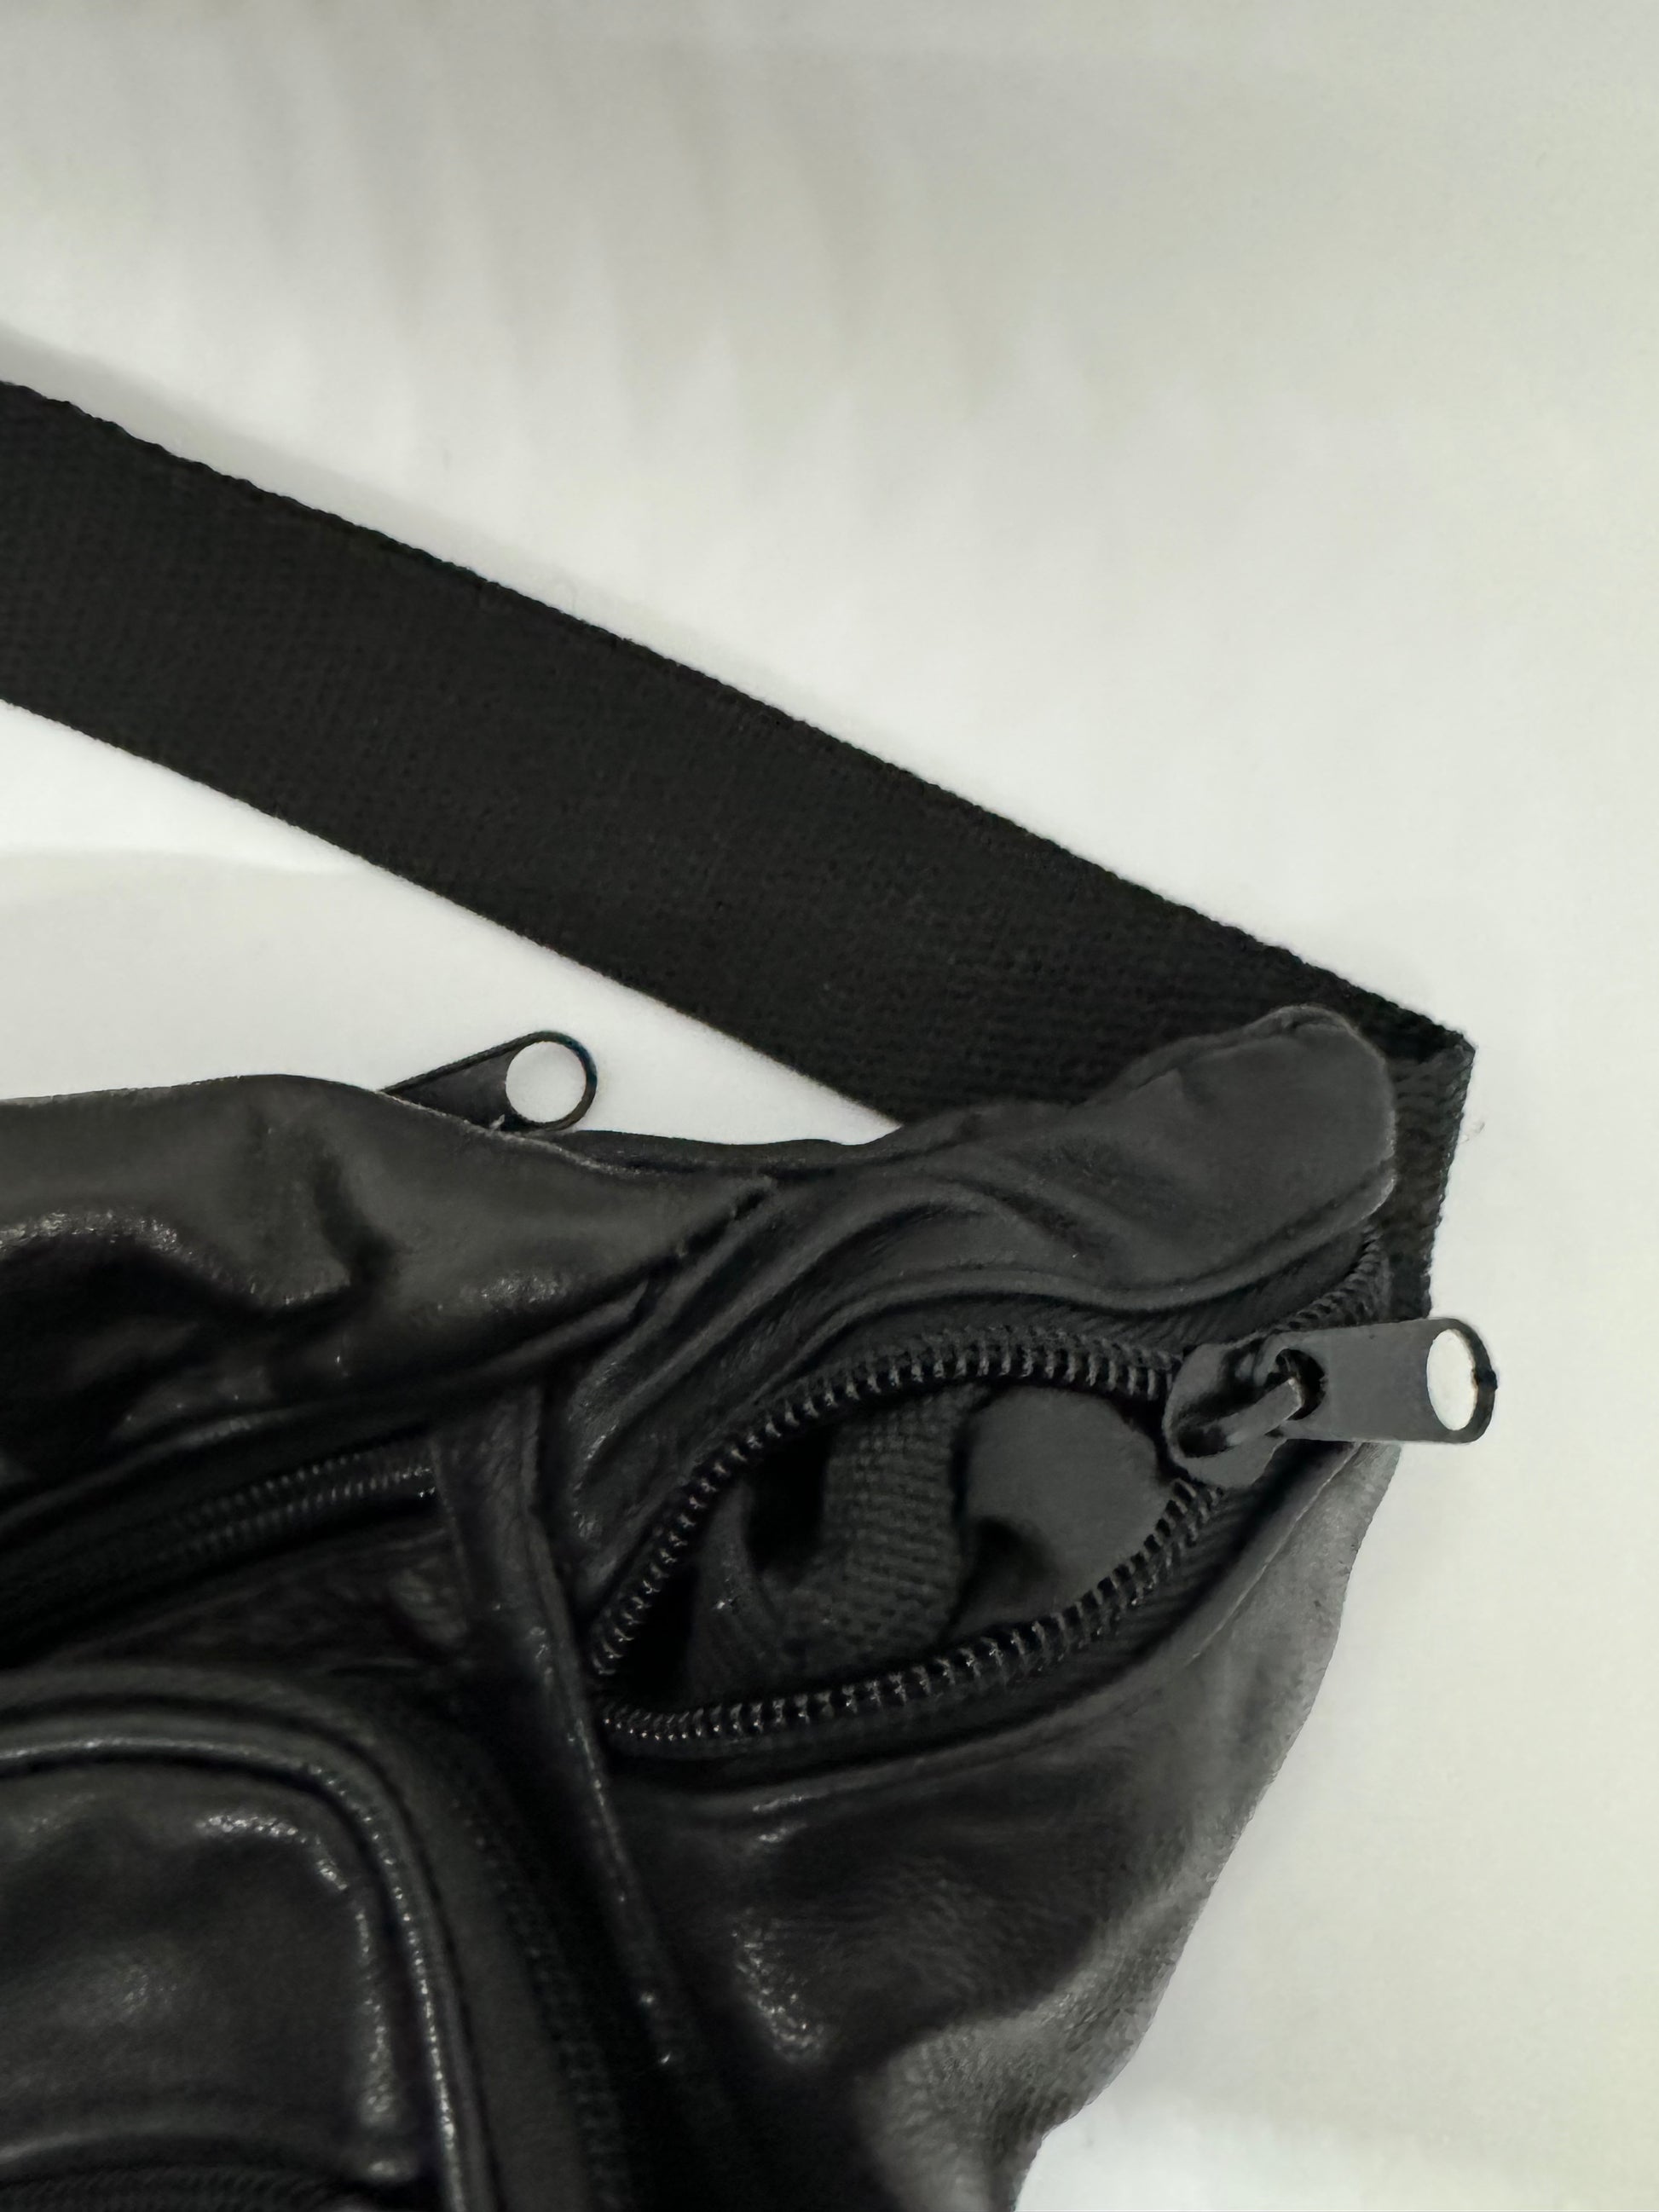 The picture shows a black item made of a material that appears to be leather or a similar fabric. It has a zipper with a metal pull tab. The zipper is partially open, revealing a black inner lining. There is also a black woven strap in the picture, which is lying next to the leather-like item. The background is white.